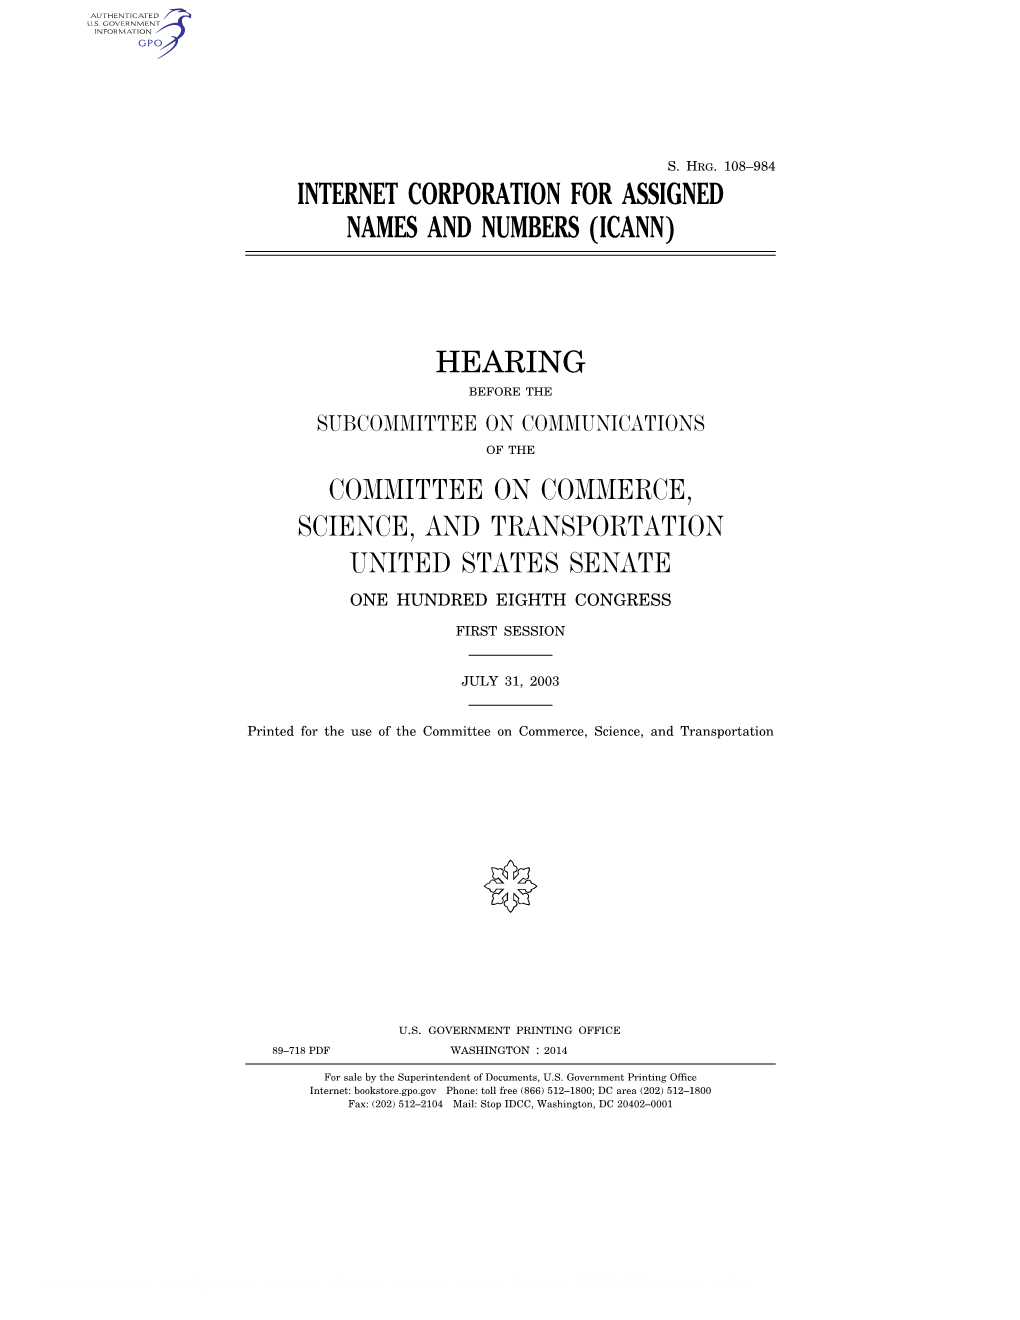 Internet Corporation for Assigned Names and Numbers (Icann) Hearing Committee on Commerce, Science, and Transportation United St